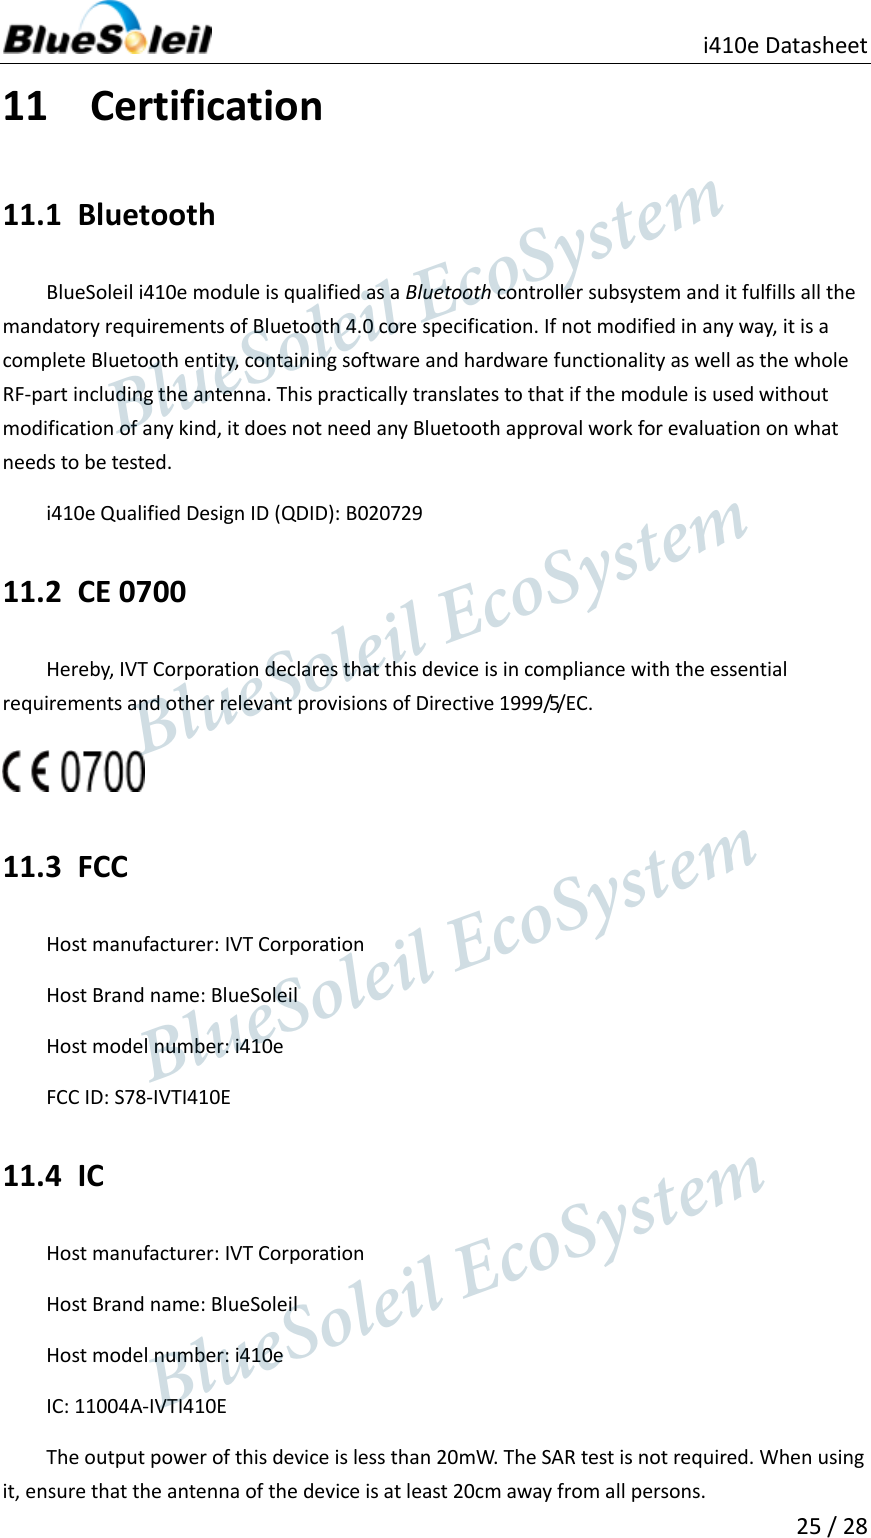                                               i410e Datasheet  25 / 28  11 Certification 11.1 Bluetooth BlueSoleil i410e module is qualified as a Bluetooth controller subsystem and it fulfills all the mandatory requirements of Bluetooth 4.0 core specification. If not modified in any way, it is a complete Bluetooth entity, containing software and hardware functionality as well as the whole RF-part including the antenna. This practically translates to that if the module is used without modification of any kind, it does not need any Bluetooth approval work for evaluation on what needs to be tested. i410e Qualified Design ID (QDID): B020729 11.2 CE 0700 Hereby, IVT Corporation declares that this device is in compliance with the essential requirements and other relevant provisions of Directive 1999/5/EC.  11.3 FCC Host manufacturer: IVT Corporation Host Brand name: BlueSoleil Host model number: i410e FCC ID: S78-IVTI410E 11.4 IC Host manufacturer: IVT Corporation Host Brand name: BlueSoleil Host model number: i410e IC: 11004A-IVTI410E The output power of this device is less than 20mW. The SAR test is not required. When using it, ensure that the antenna of the device is at least 20cm away from all persons.                  BlueSoleil EcoSystem            BlueSoleil EcoSystem      BlueSoleil EcoSystemBlueSoleil EcoSystem